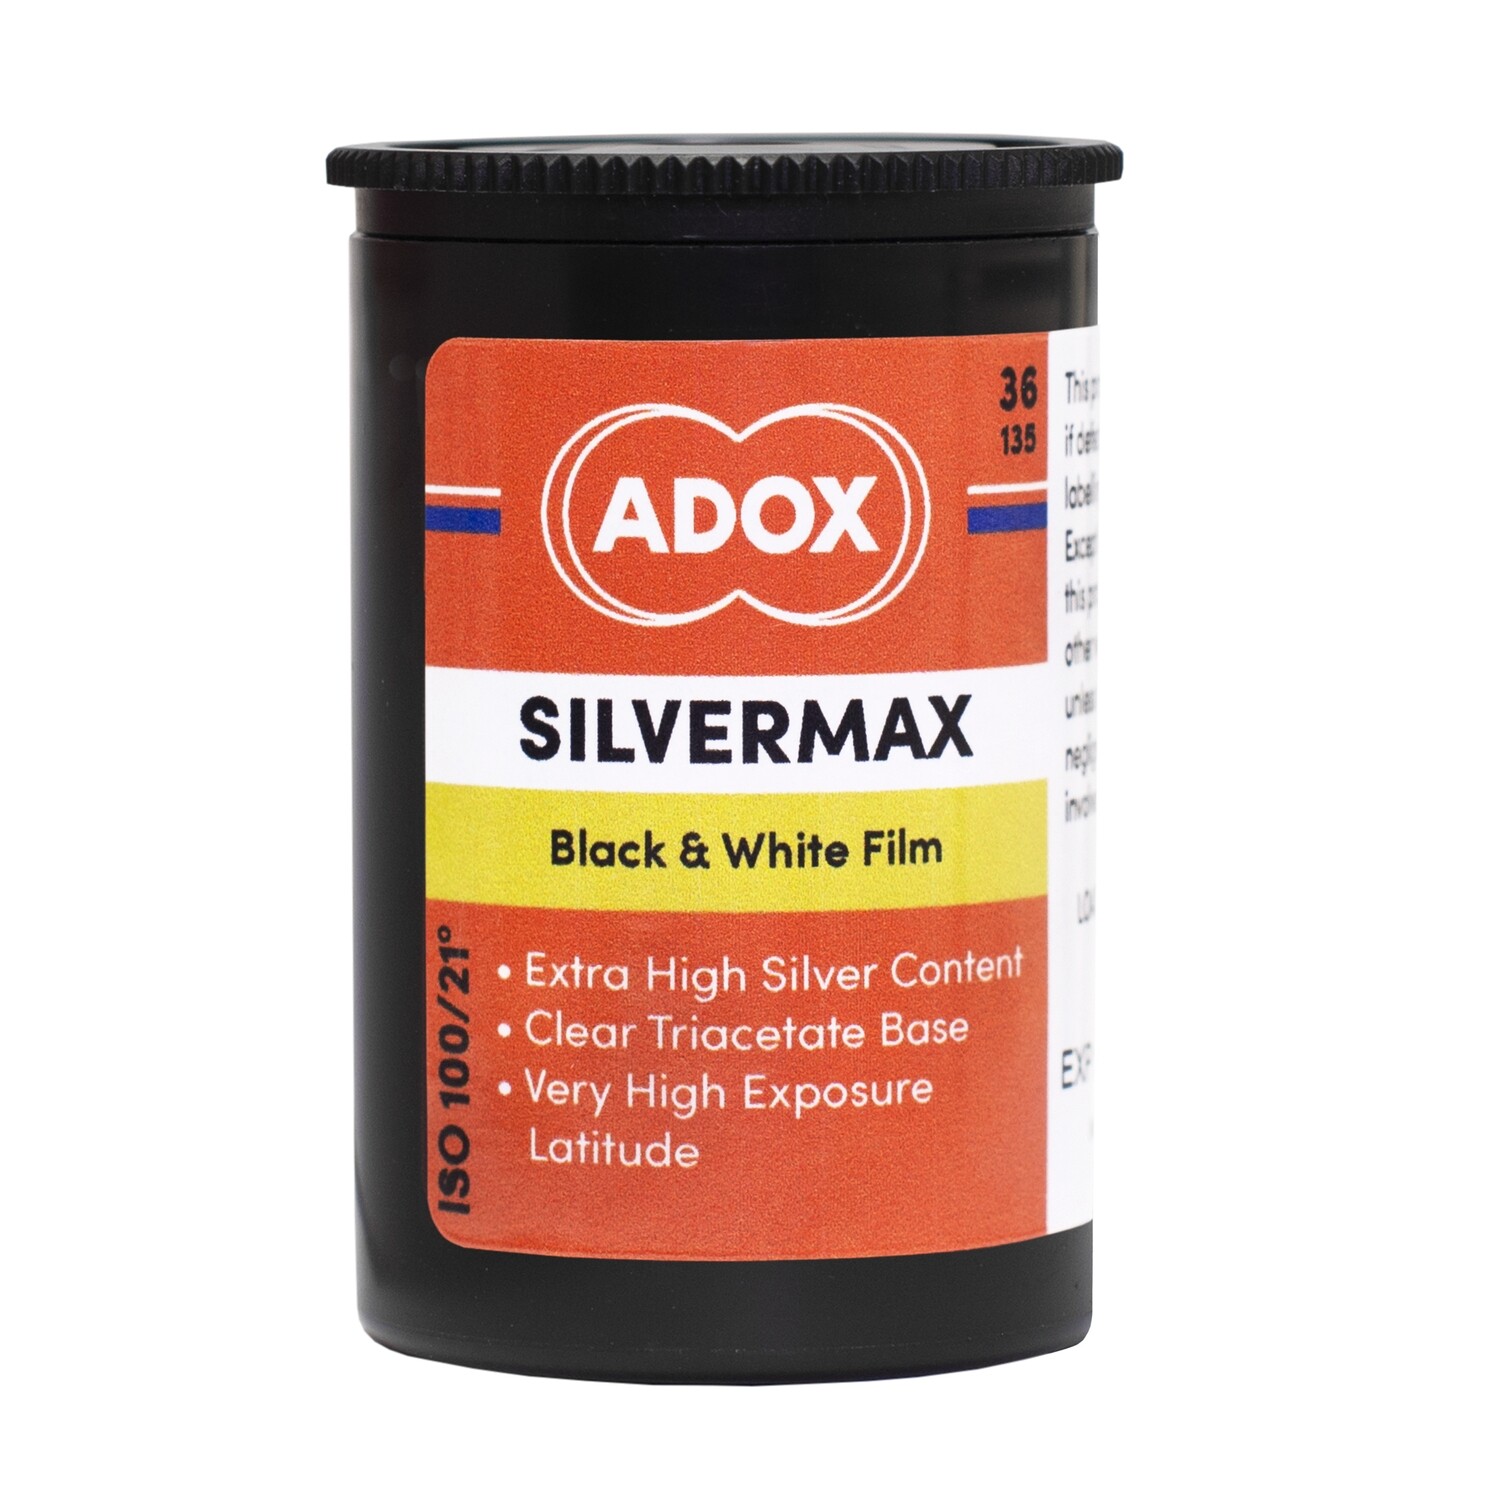 Adox Silvermax 135-36 expired 02/2023